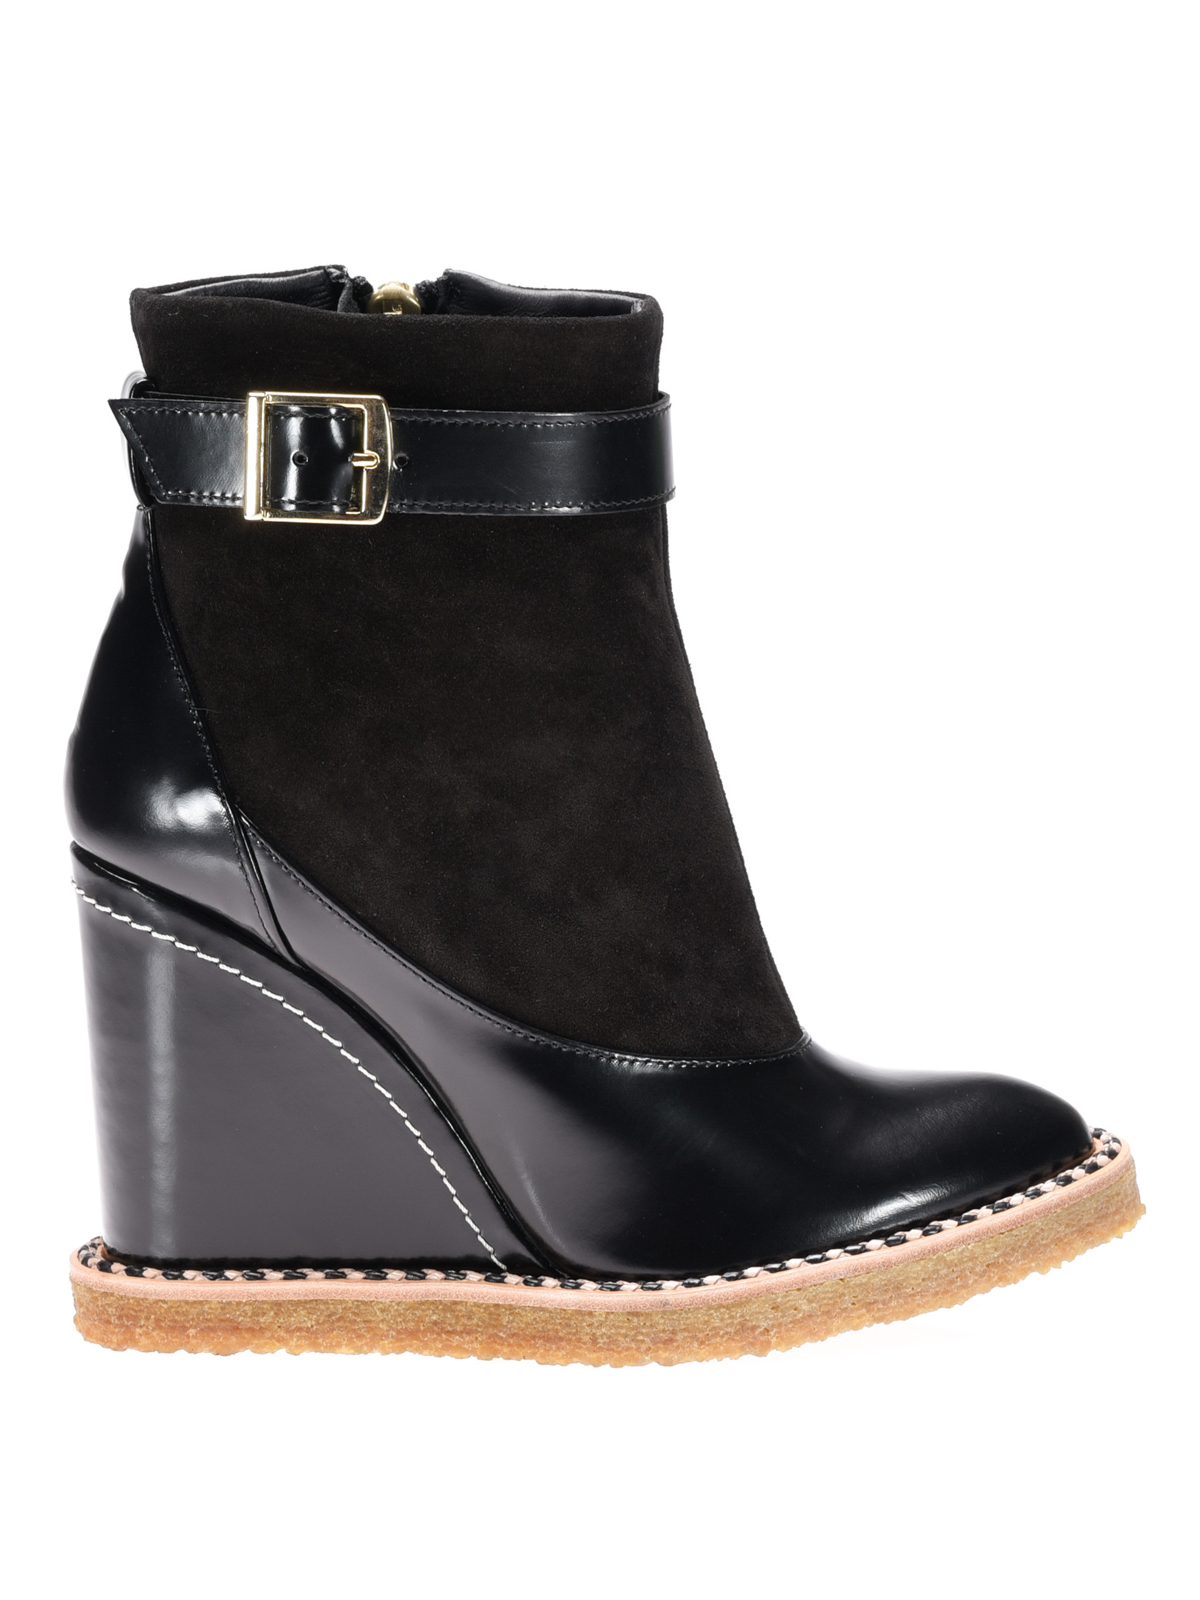 Ankle boots Paloma Barcelò - Indo suede leather wedge booties - IBPZAS02